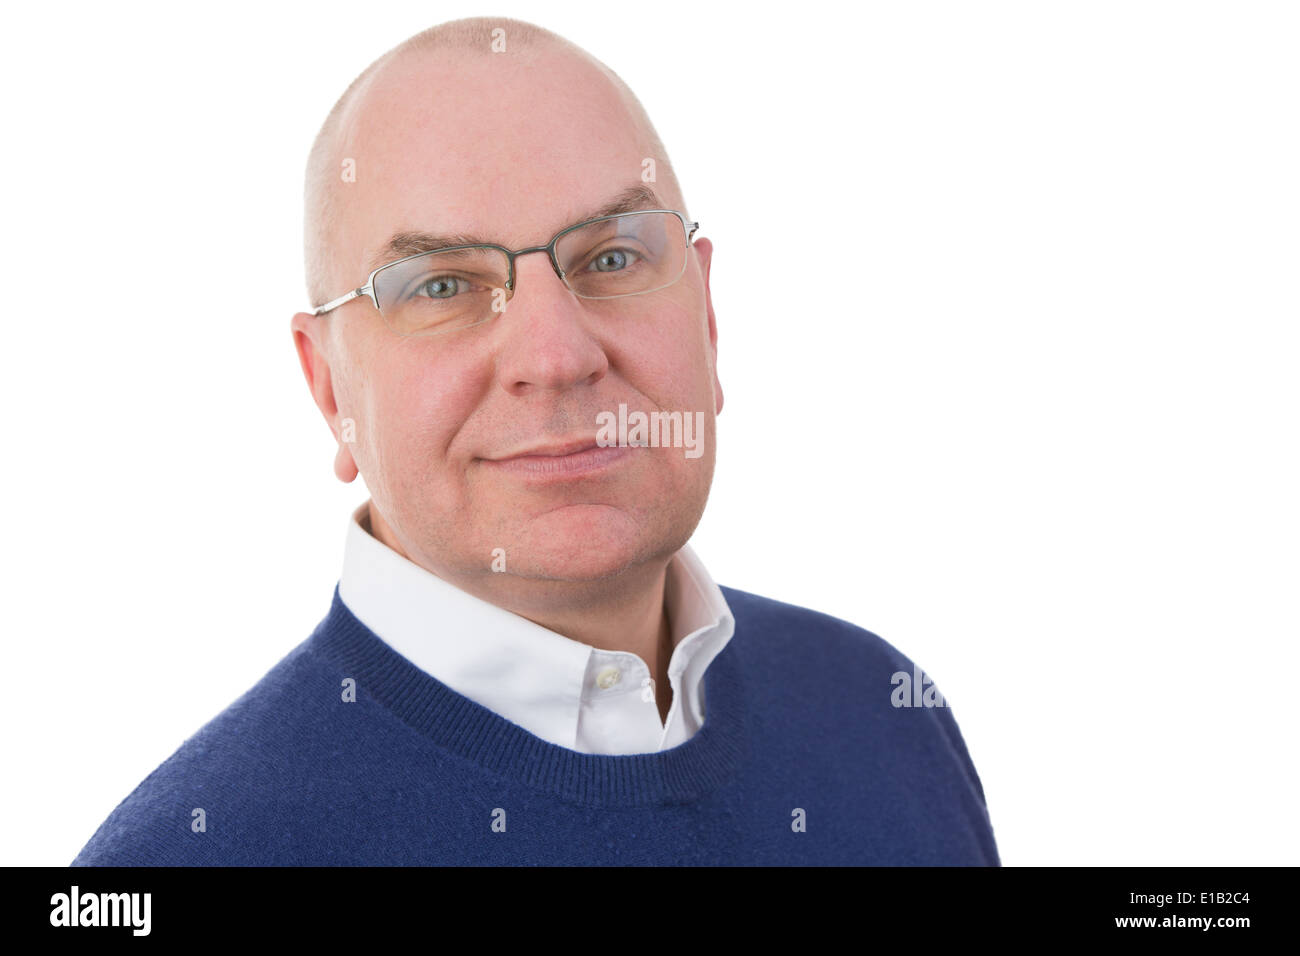 Observant middle-aged businessman looking at the camera with a serious sincere expression and a half smile, head and shoulders p Stock Photo